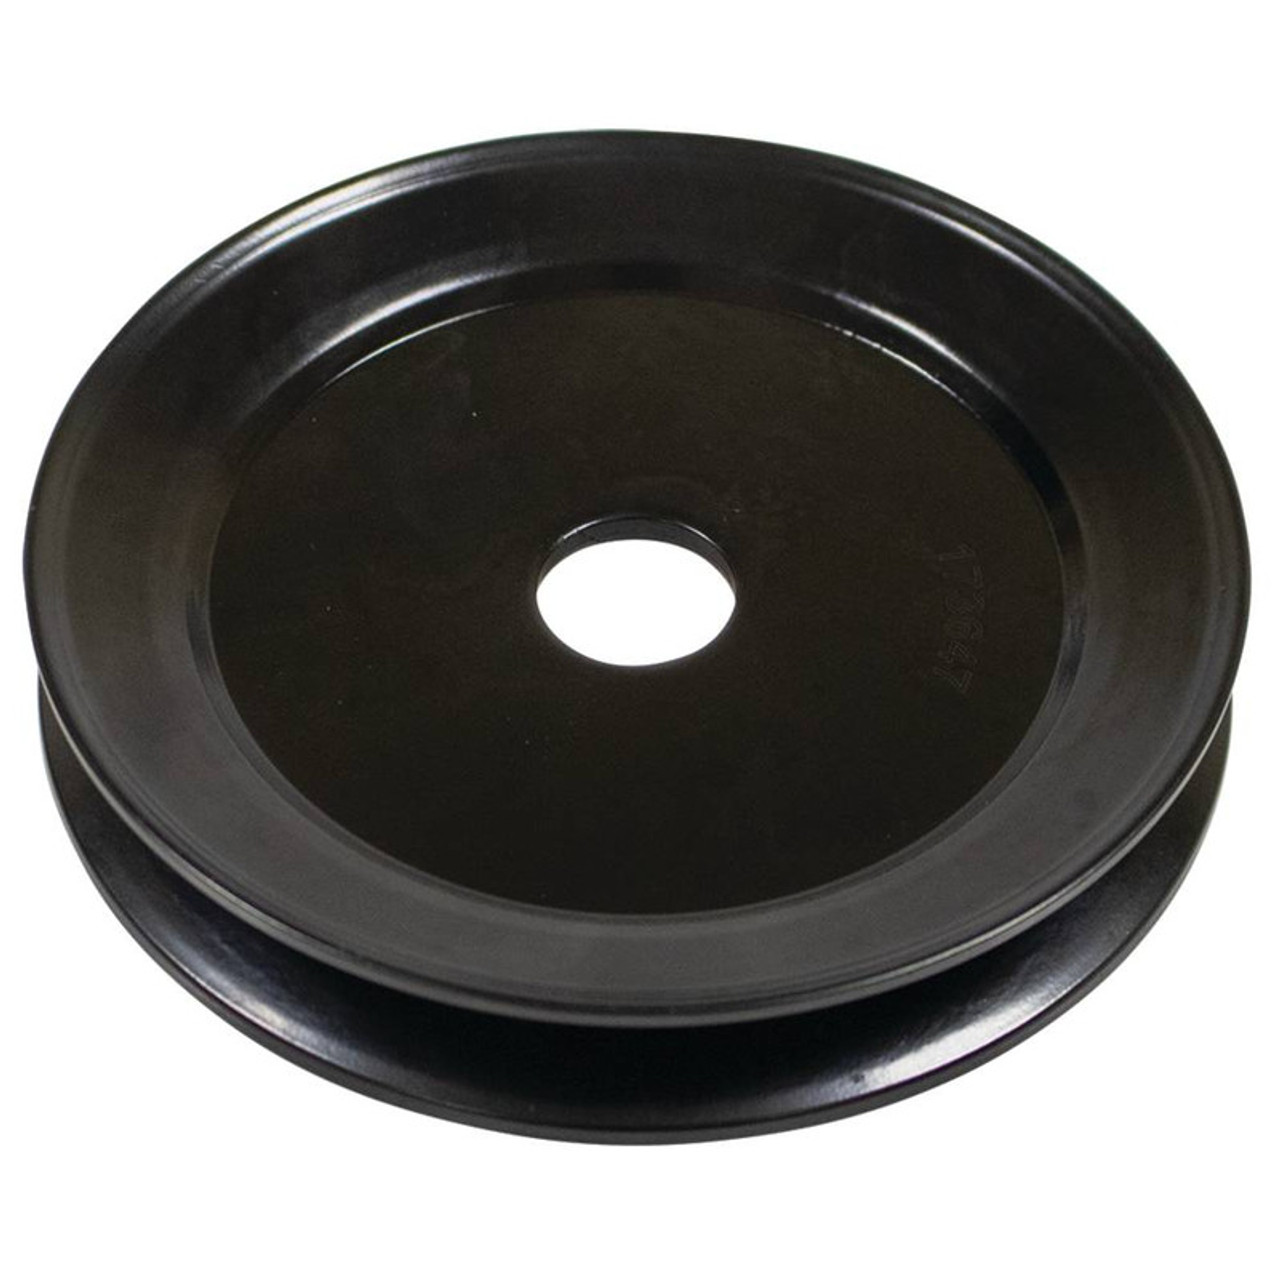 Deck Spindle Pulley for Troy Bilt 756-3089 OD: 4-1/2" ID: 3/4"